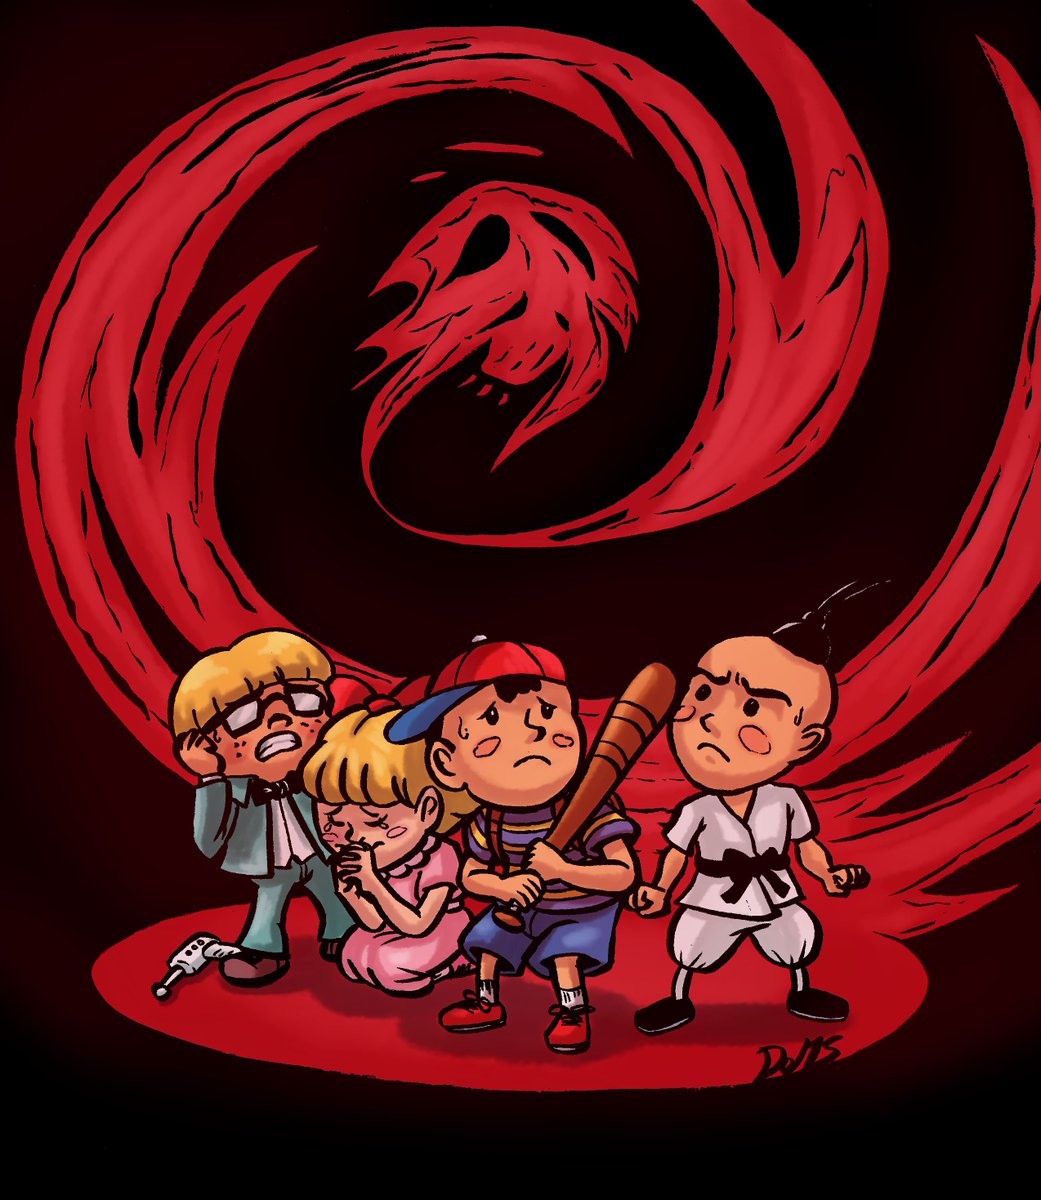 Domenico Montini Colored An Inktober Pretty Happy With It Earthbound Mother2 Ness Giygas Snes Retro Myfanart